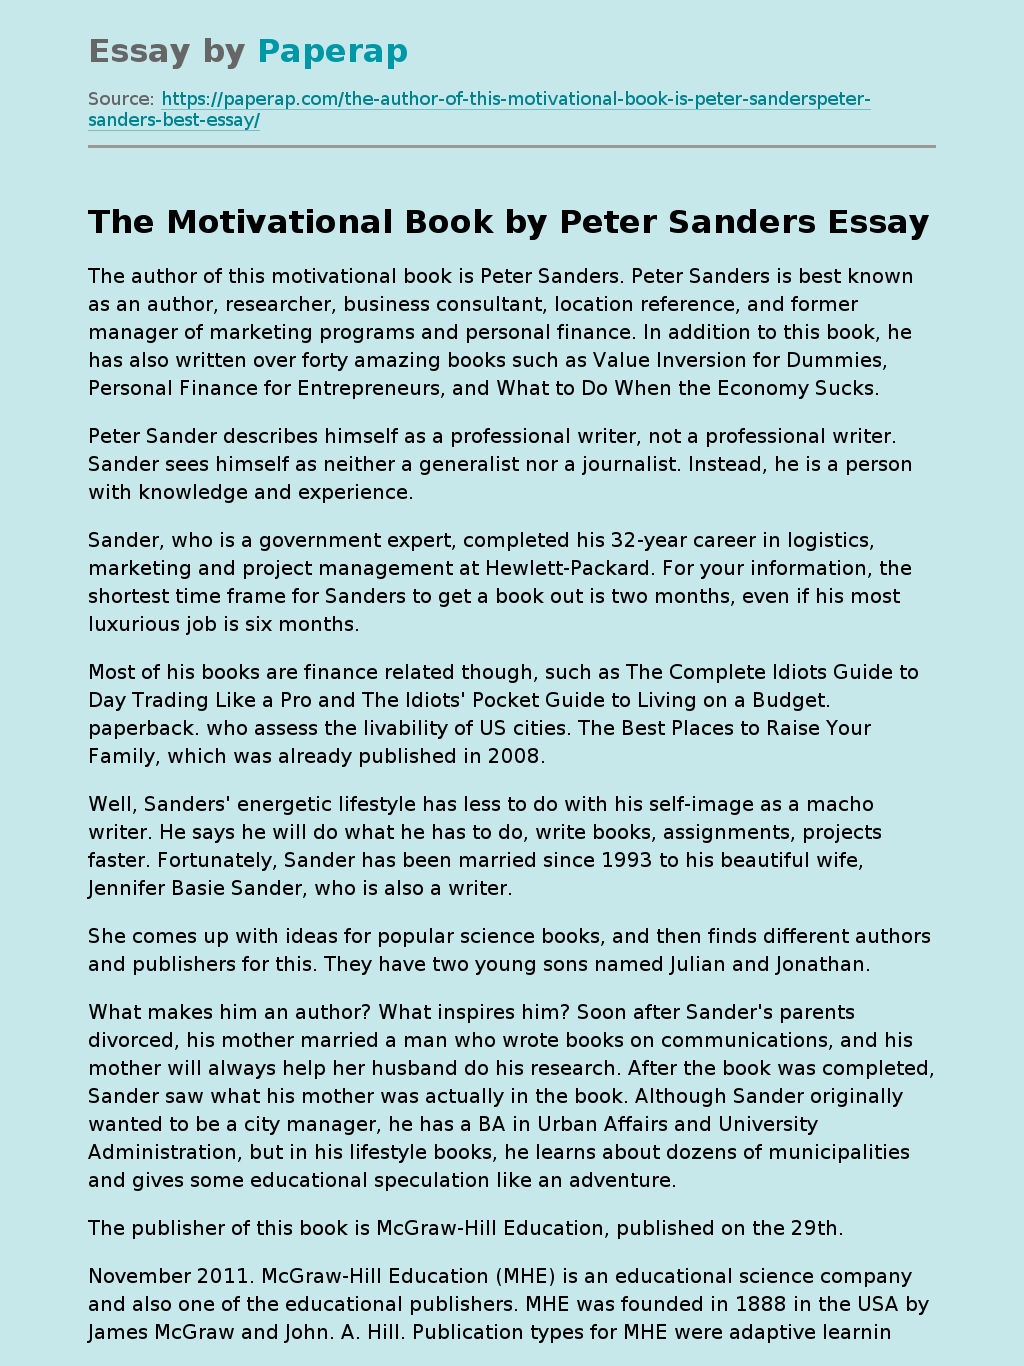 The Motivational Book by Peter Sanders